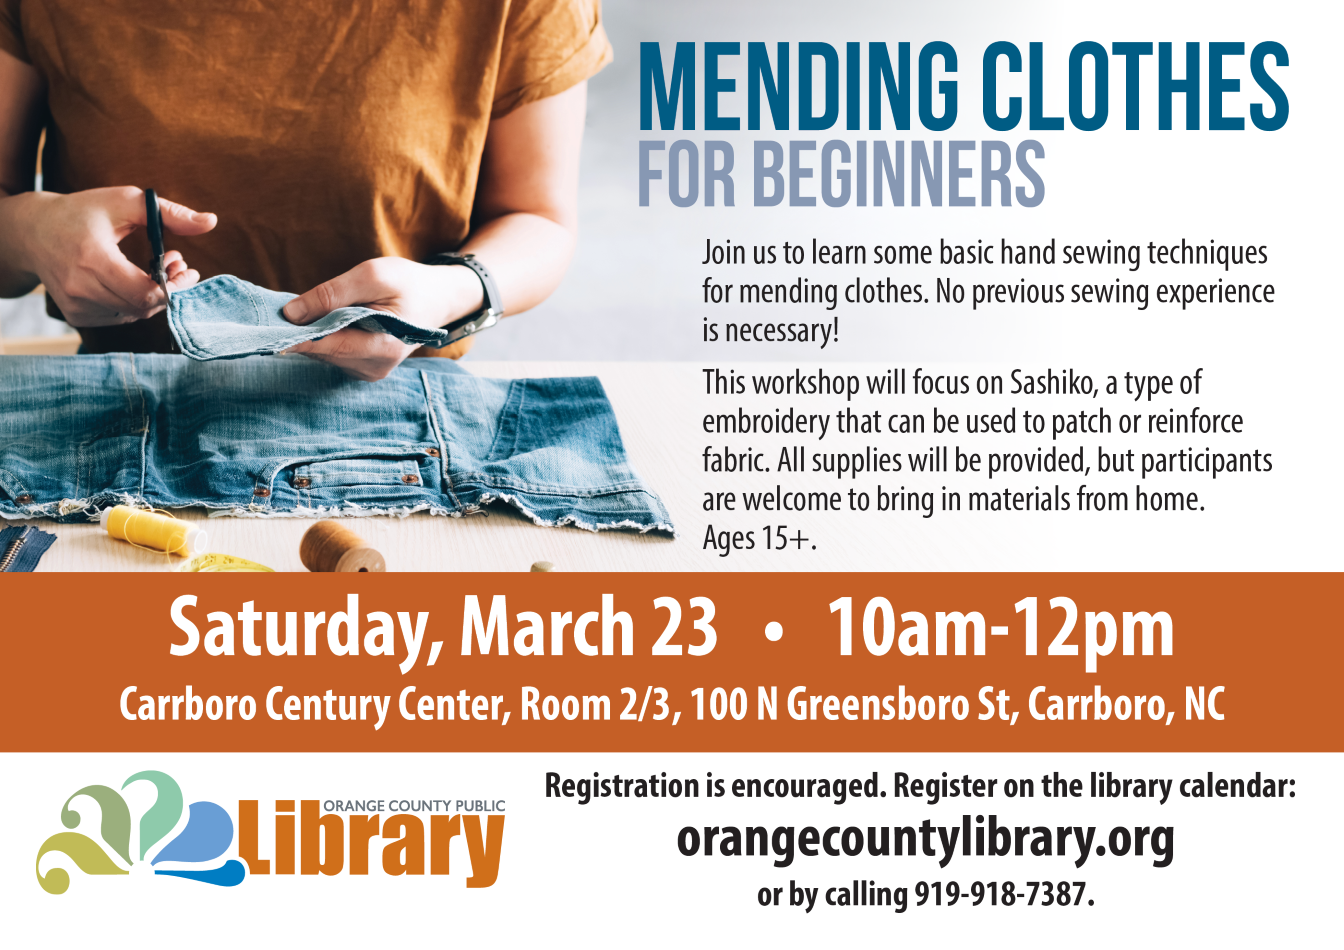 Flyer with a woman sewing a pair of used jeans. Text: Mending Clothes for Beginners ; Join us to learn some basic handsewing techniques for mending clothes. No previous sewing experience is necessary! This workshop will focus on Sashiko, a type of embroidery that can be used to patch or reinforce fabric. All supplies will be provided, but participants are welcome to bring in materials from home. Ages 15+ ; Saturday, March 23, 10am-12pm, Carrboro Century Center, Room 2/3, 100 N Greensboro St, Carrboro, NC